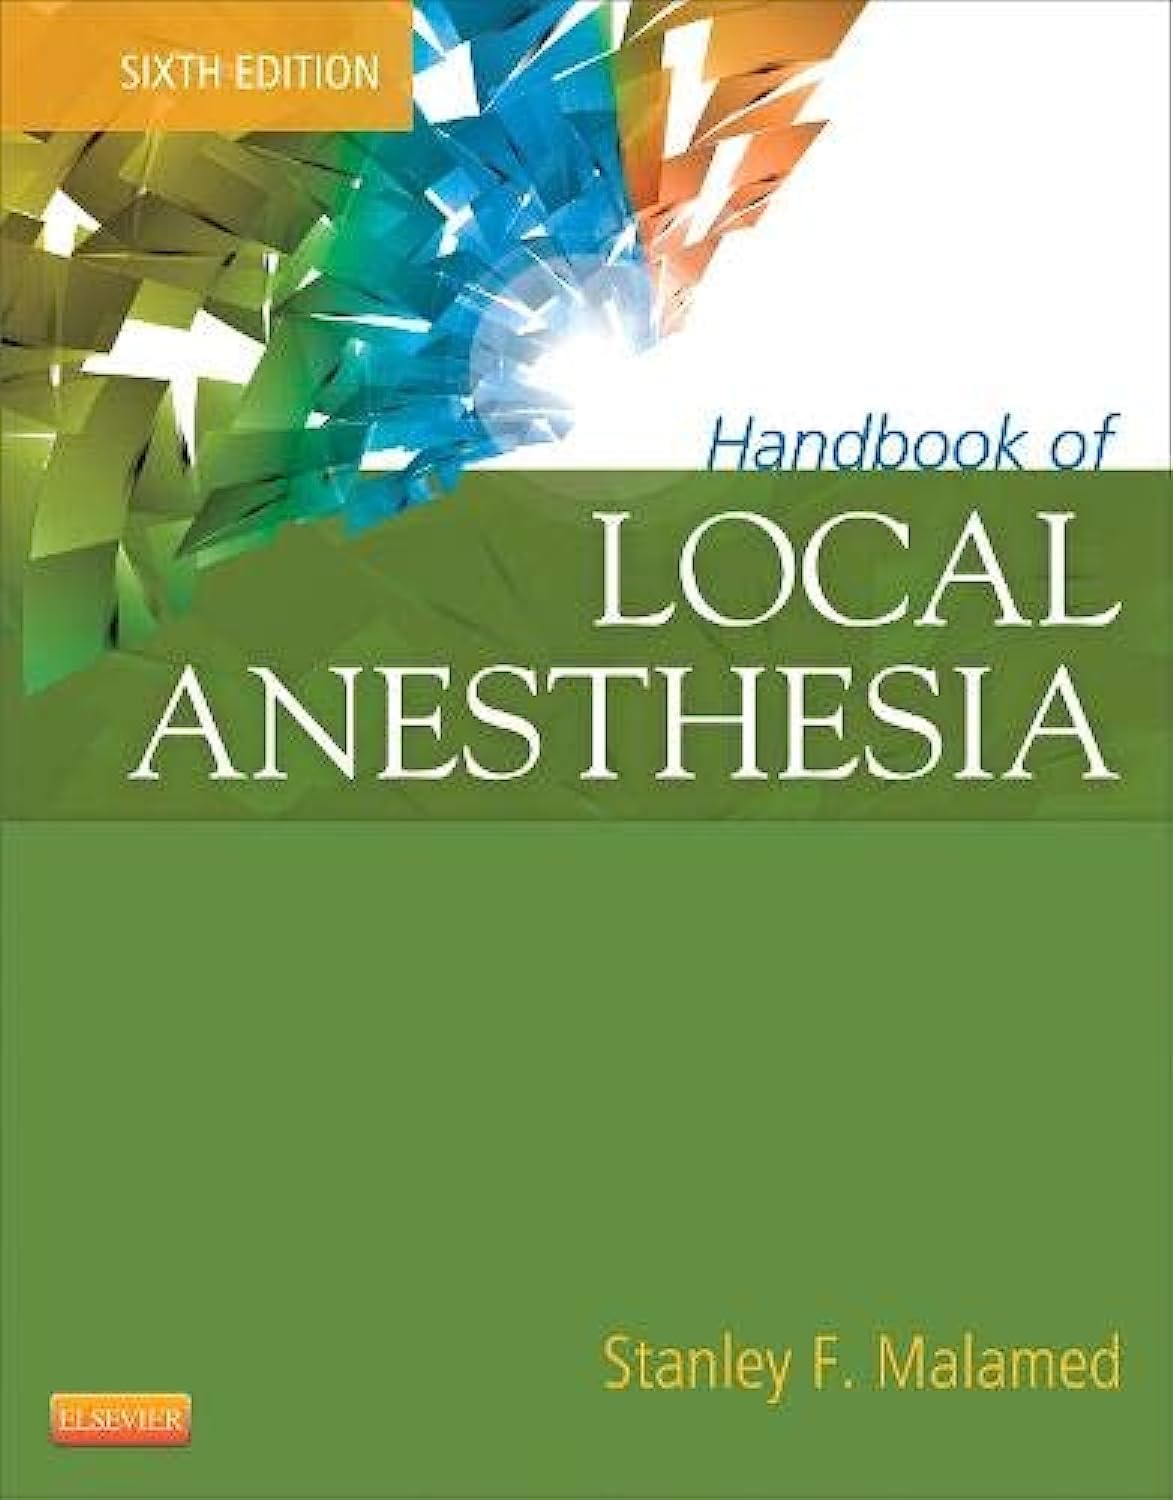 Handbook of Local Anesthesia by Stanley F. Malamed DDS (Author)